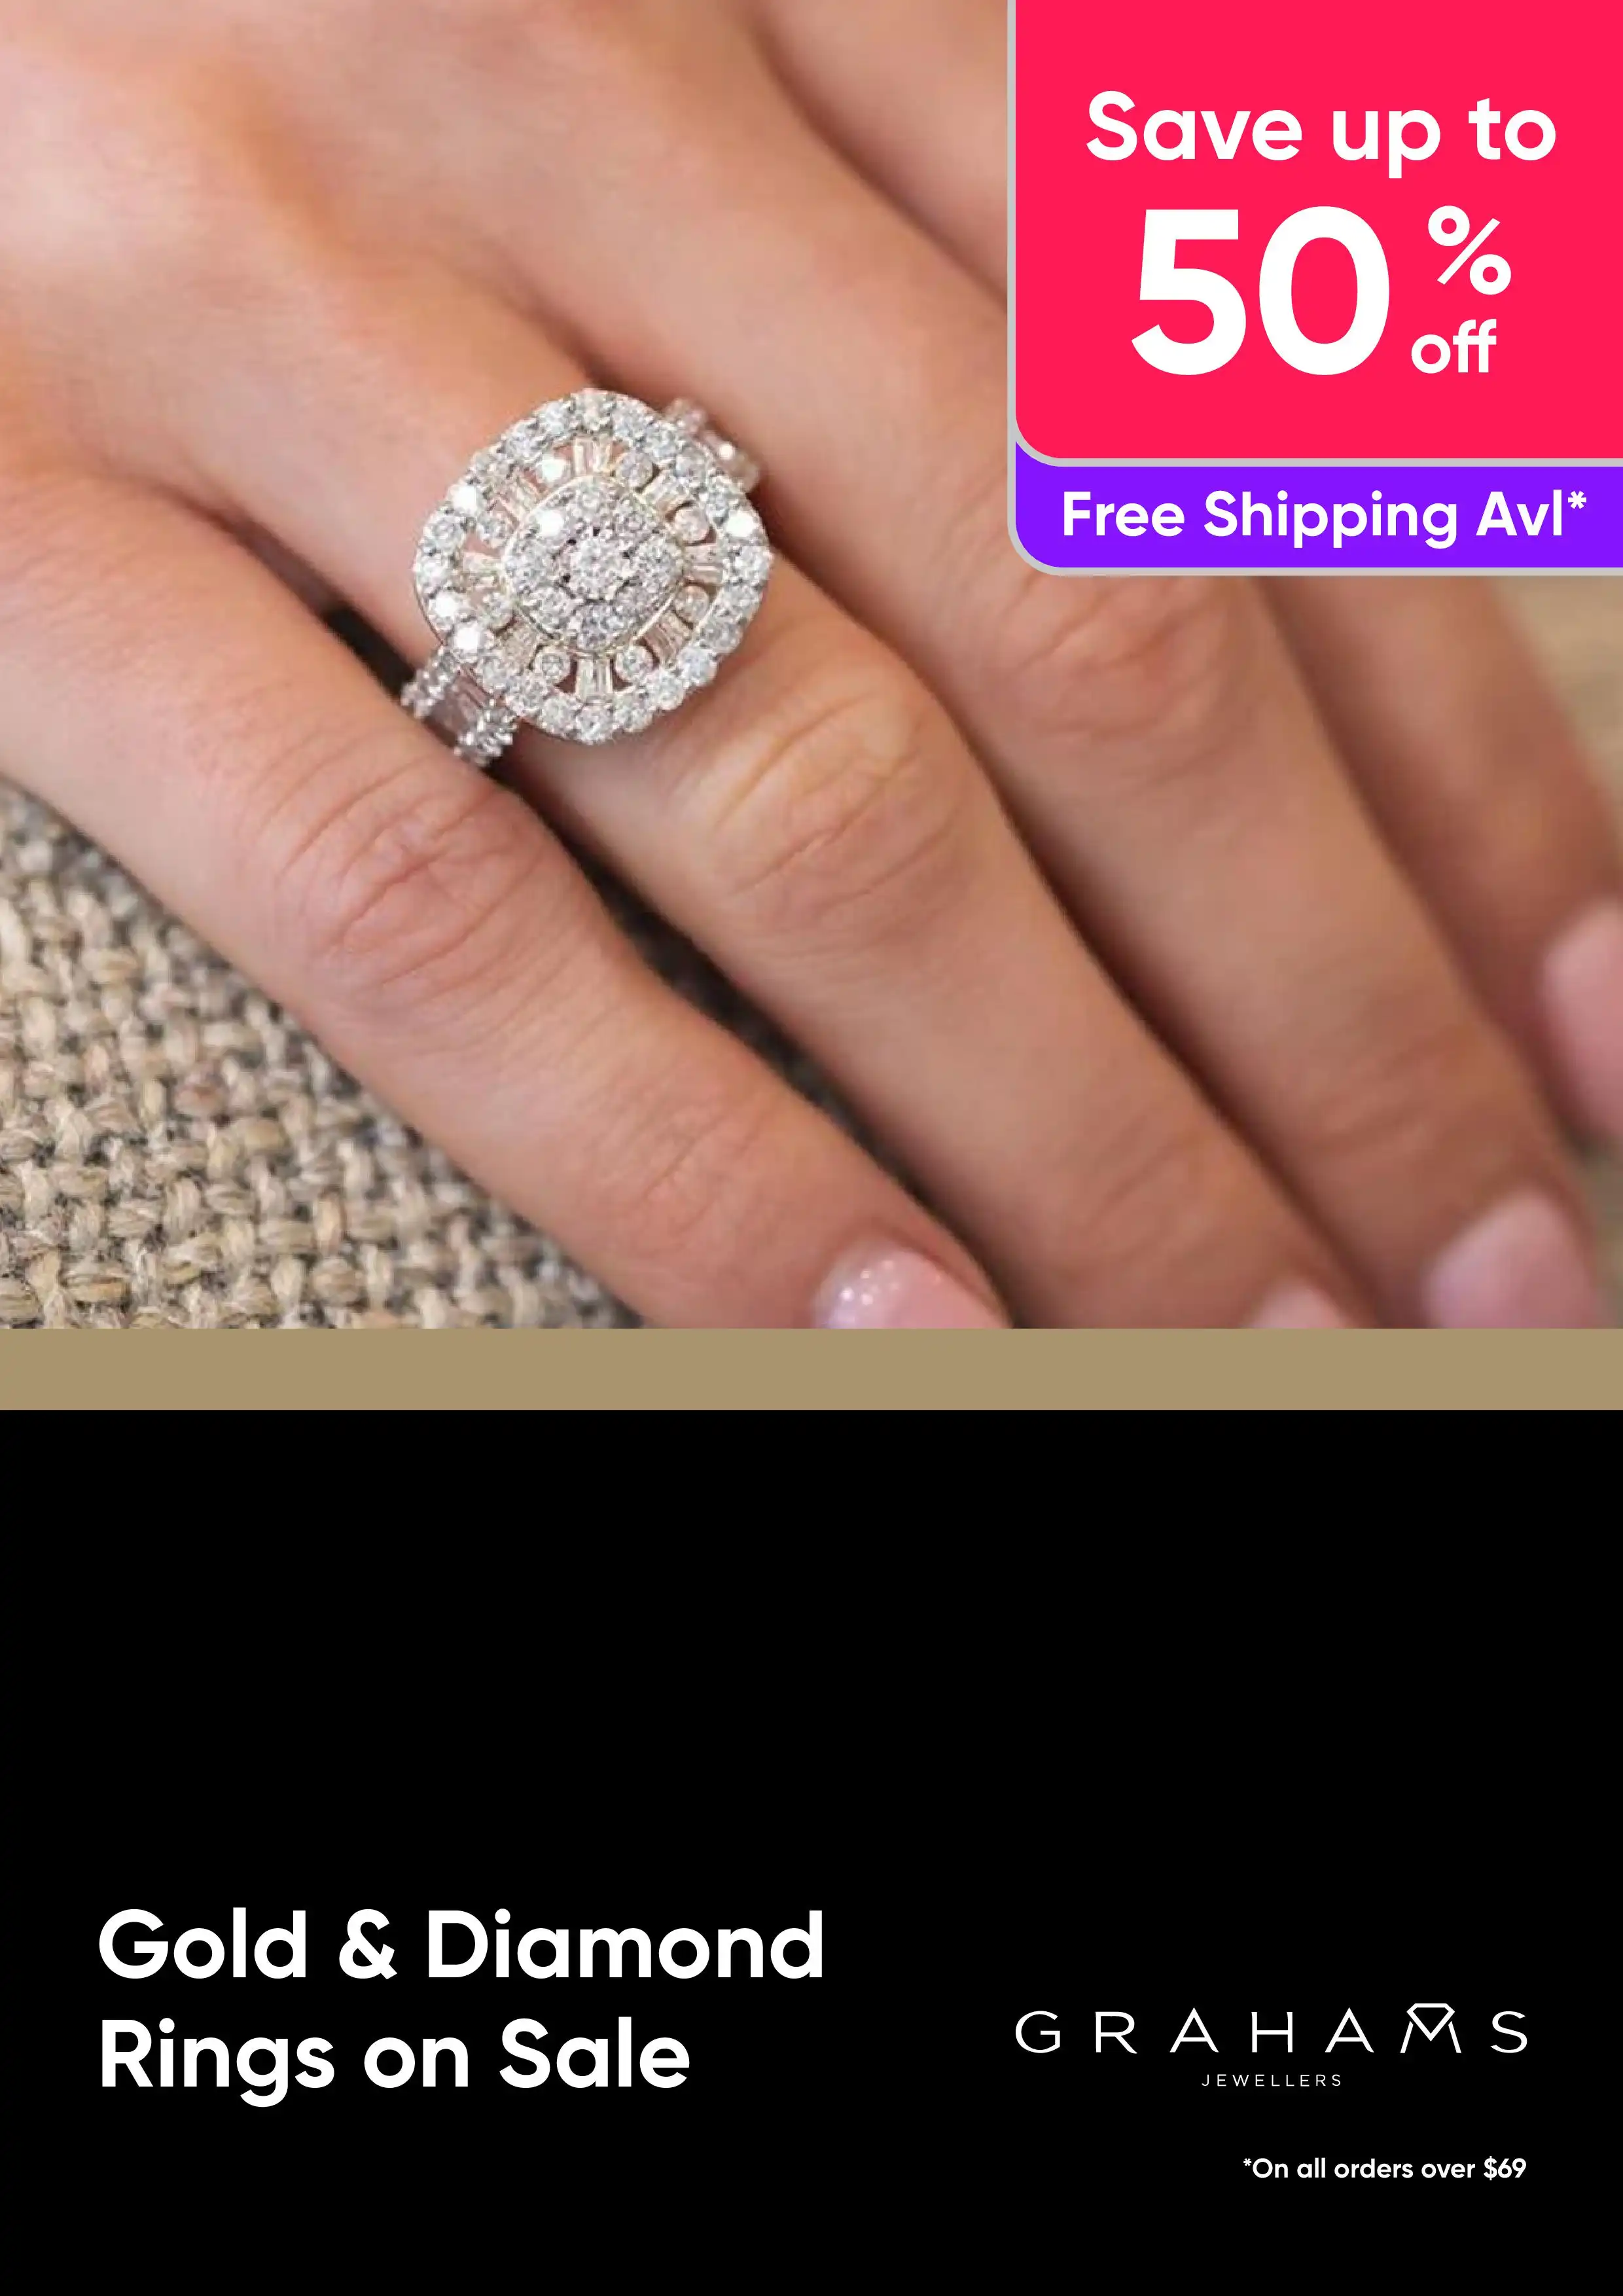 Gold and Diamond Rings on Sale - Save Up to 50% Off